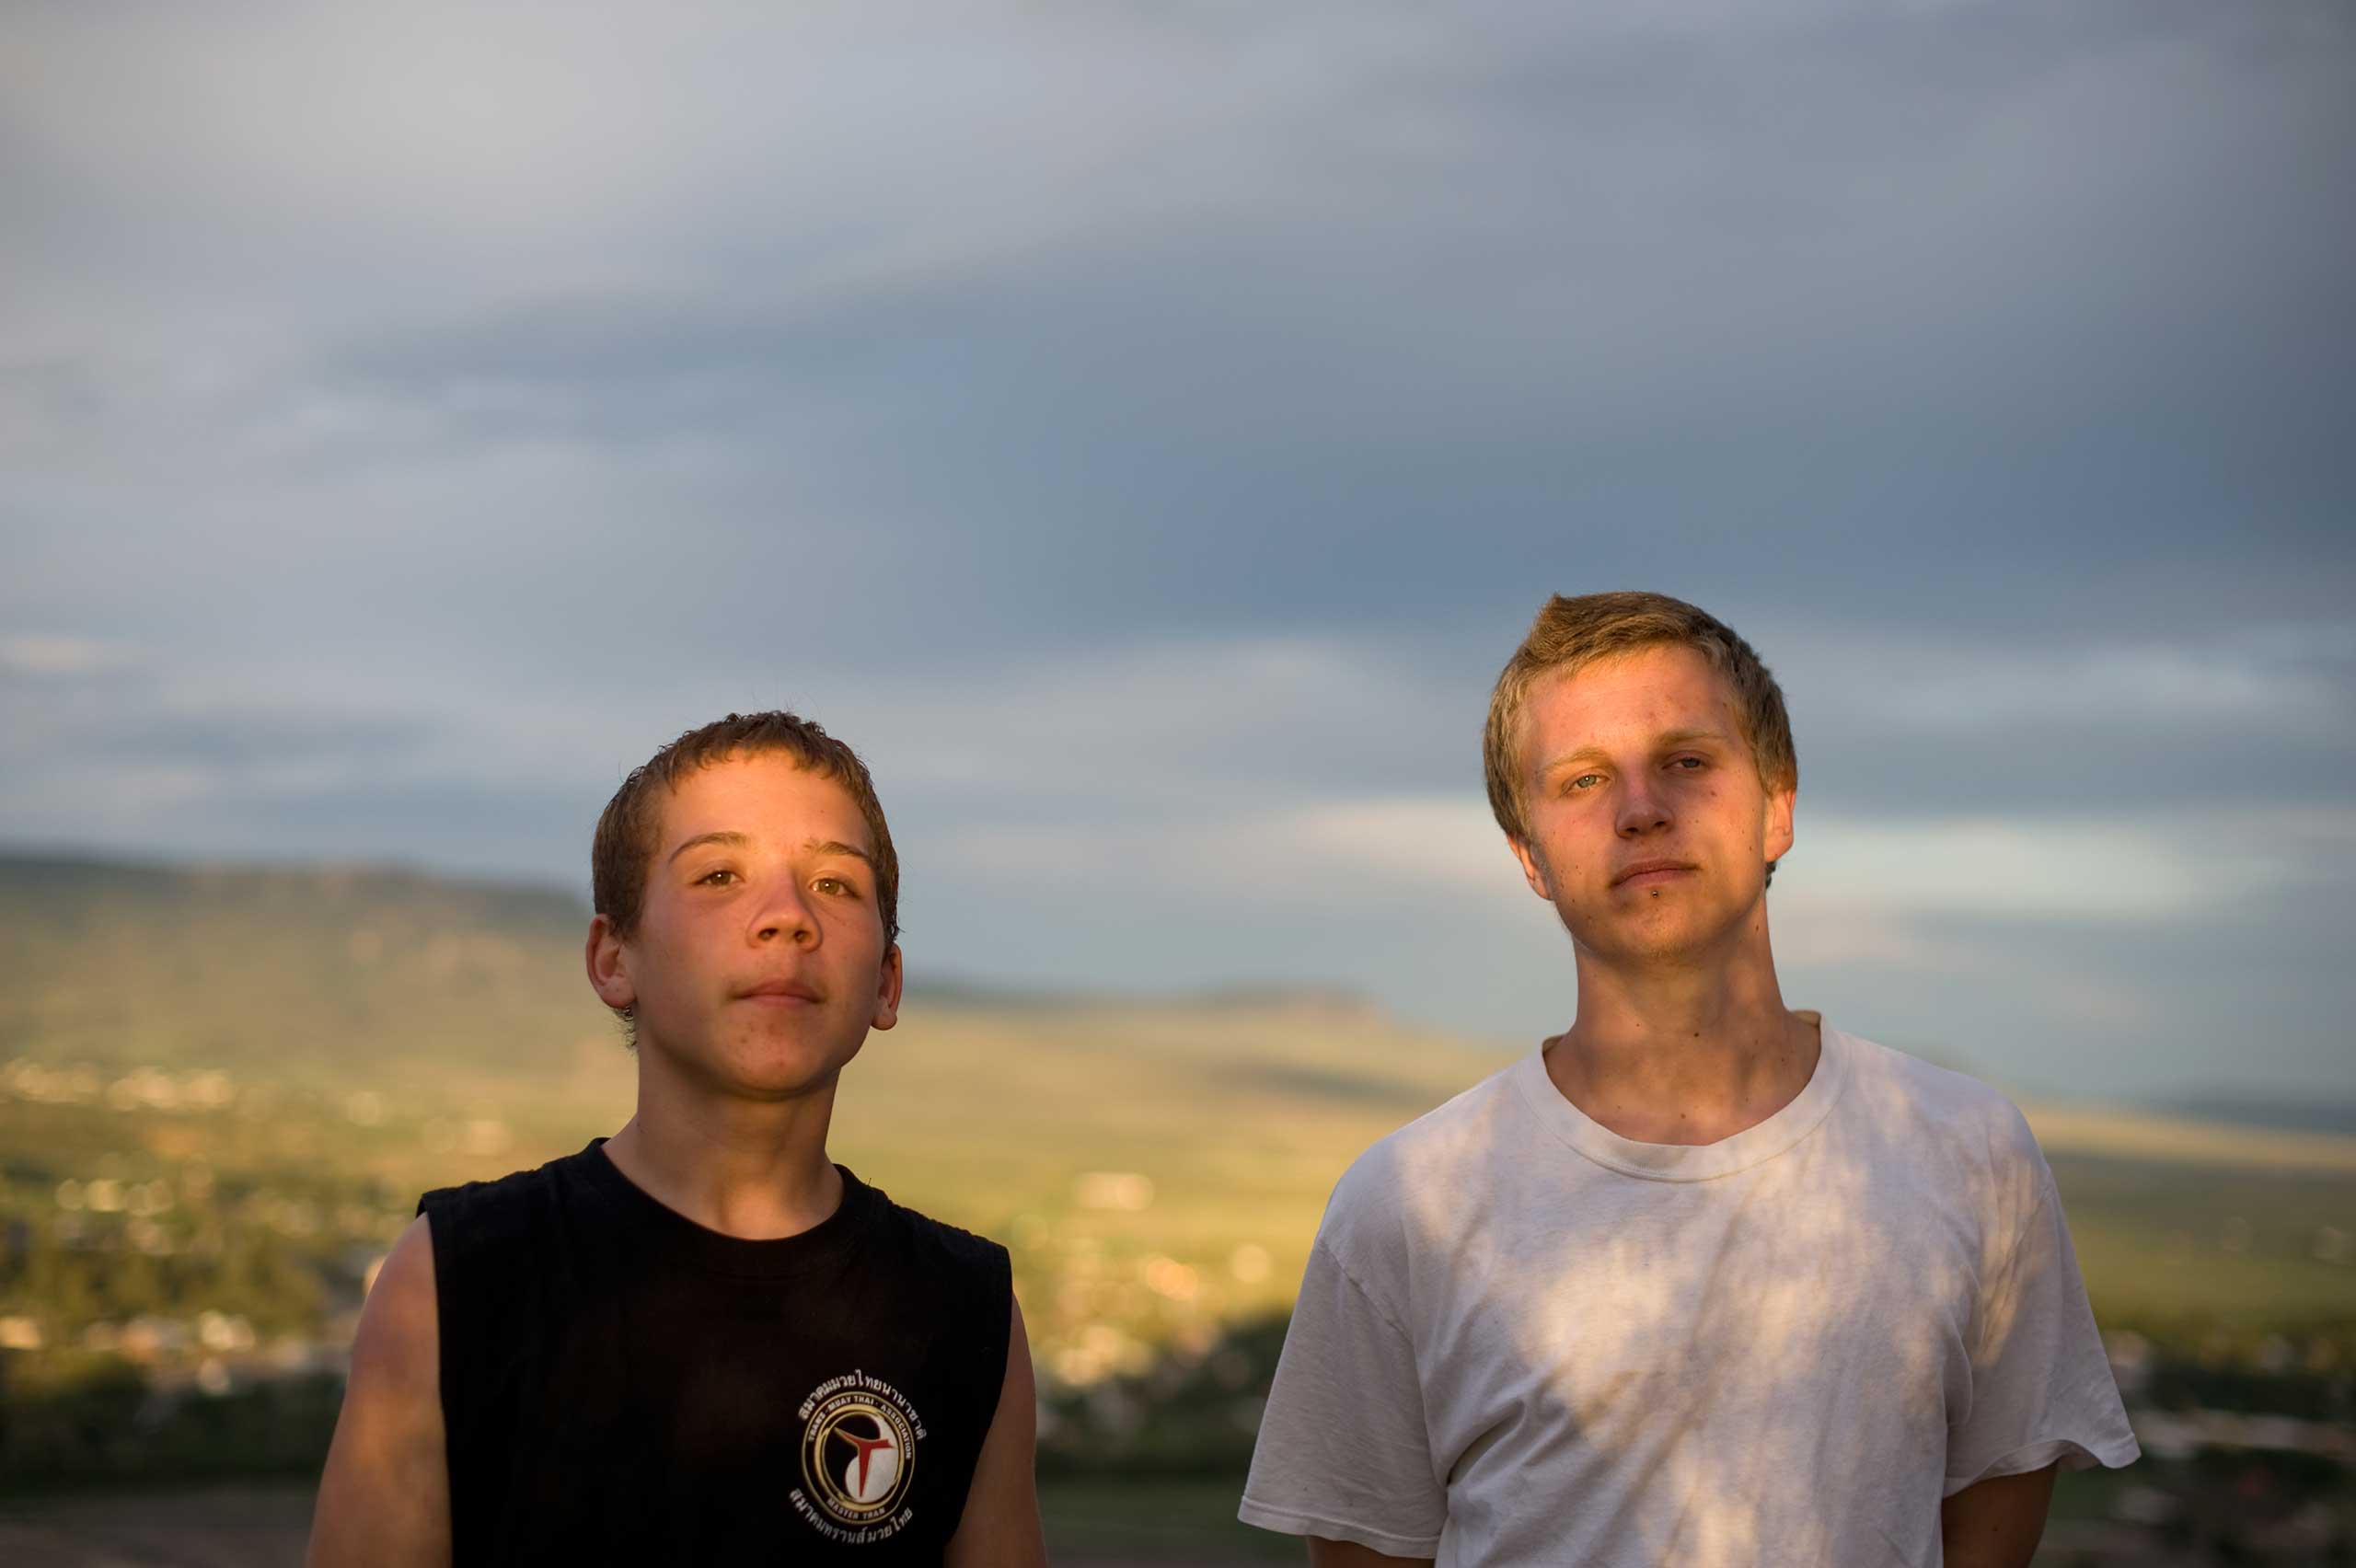 Brothers Vinny and David stand together as the sky darkens before a summer storm.